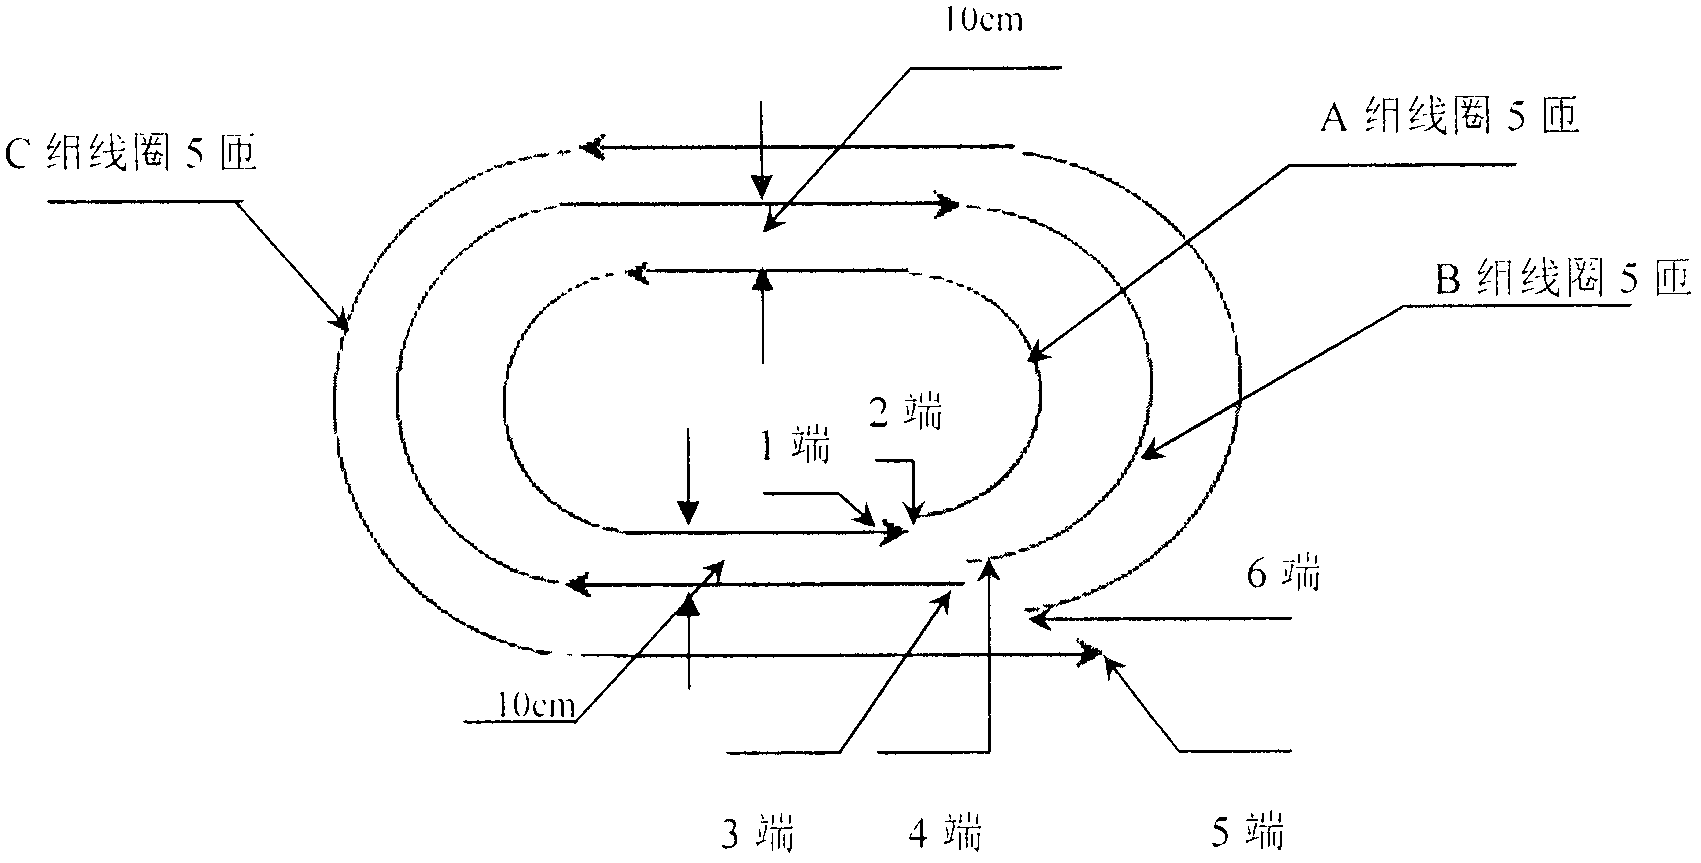 On-line electric automobile power supply system based on wireless power transmission technique